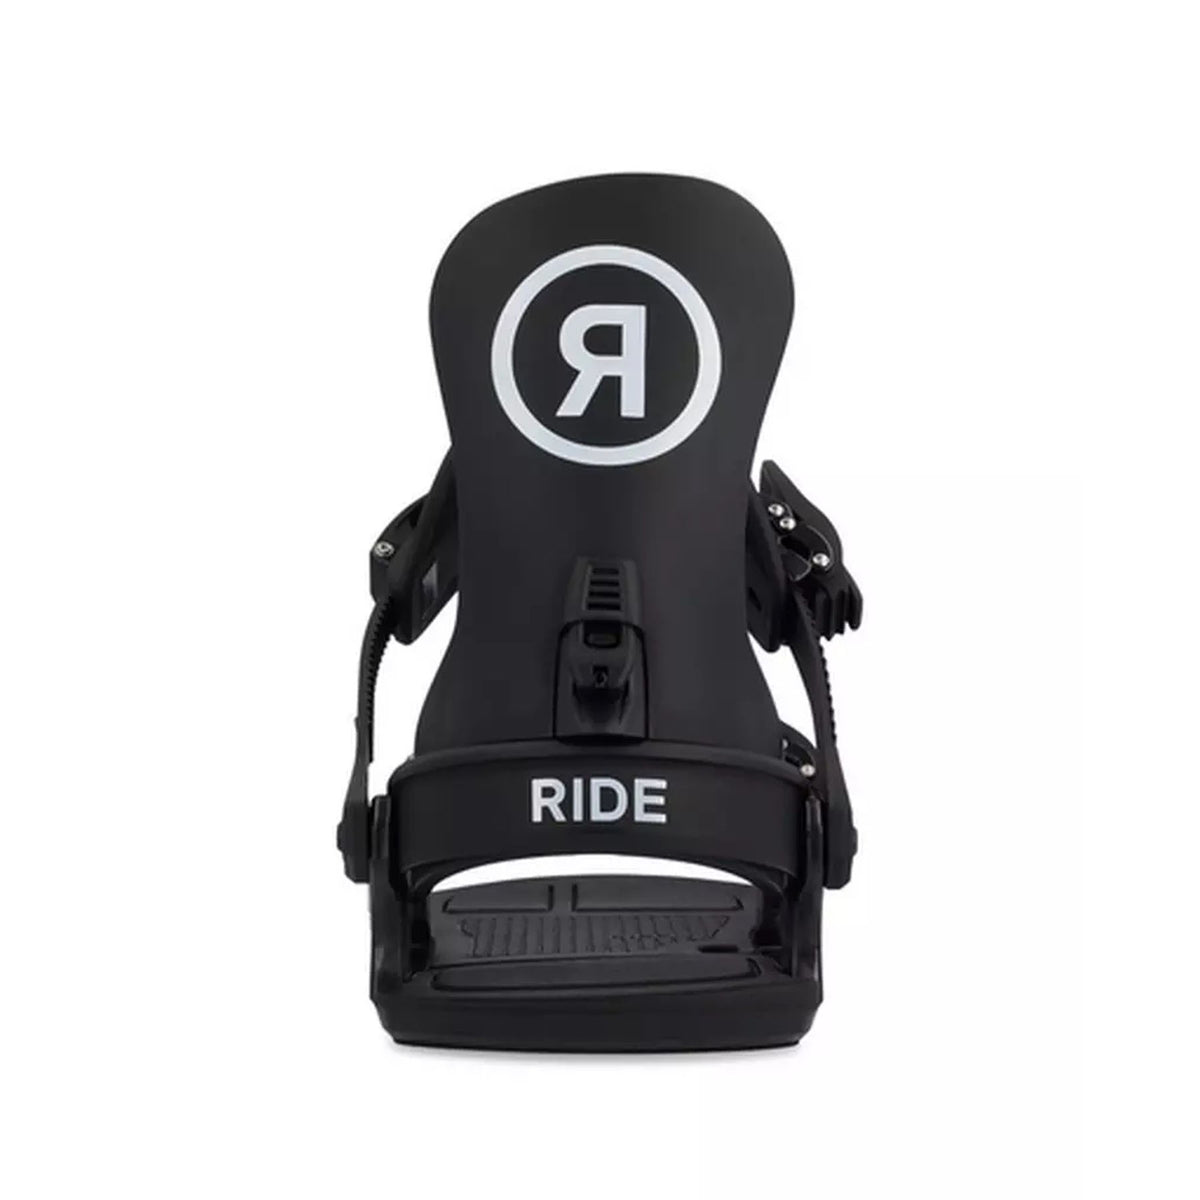 Image features the back of the Ride CL-2 binding in black with two Ride logos in white.